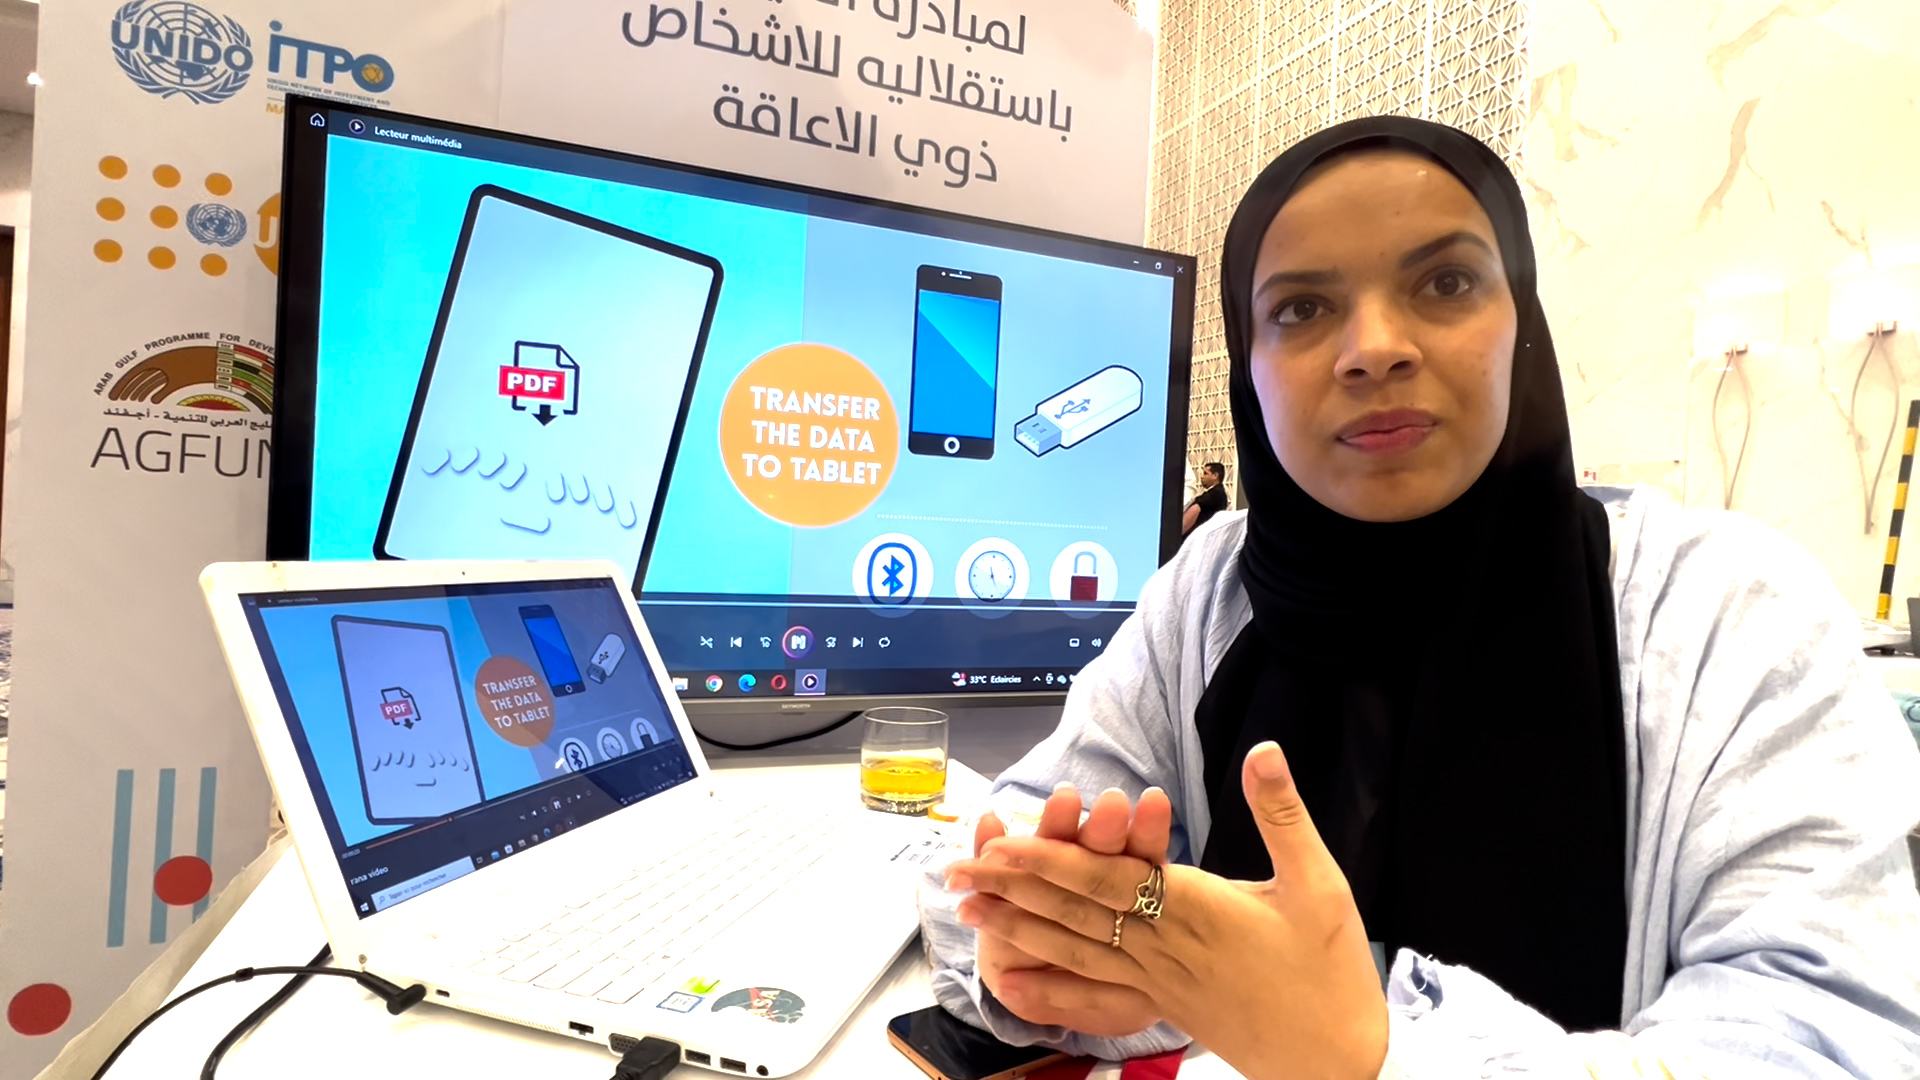 Rania Mekni, from Tunisia, is an engineer in the field of medical technology.